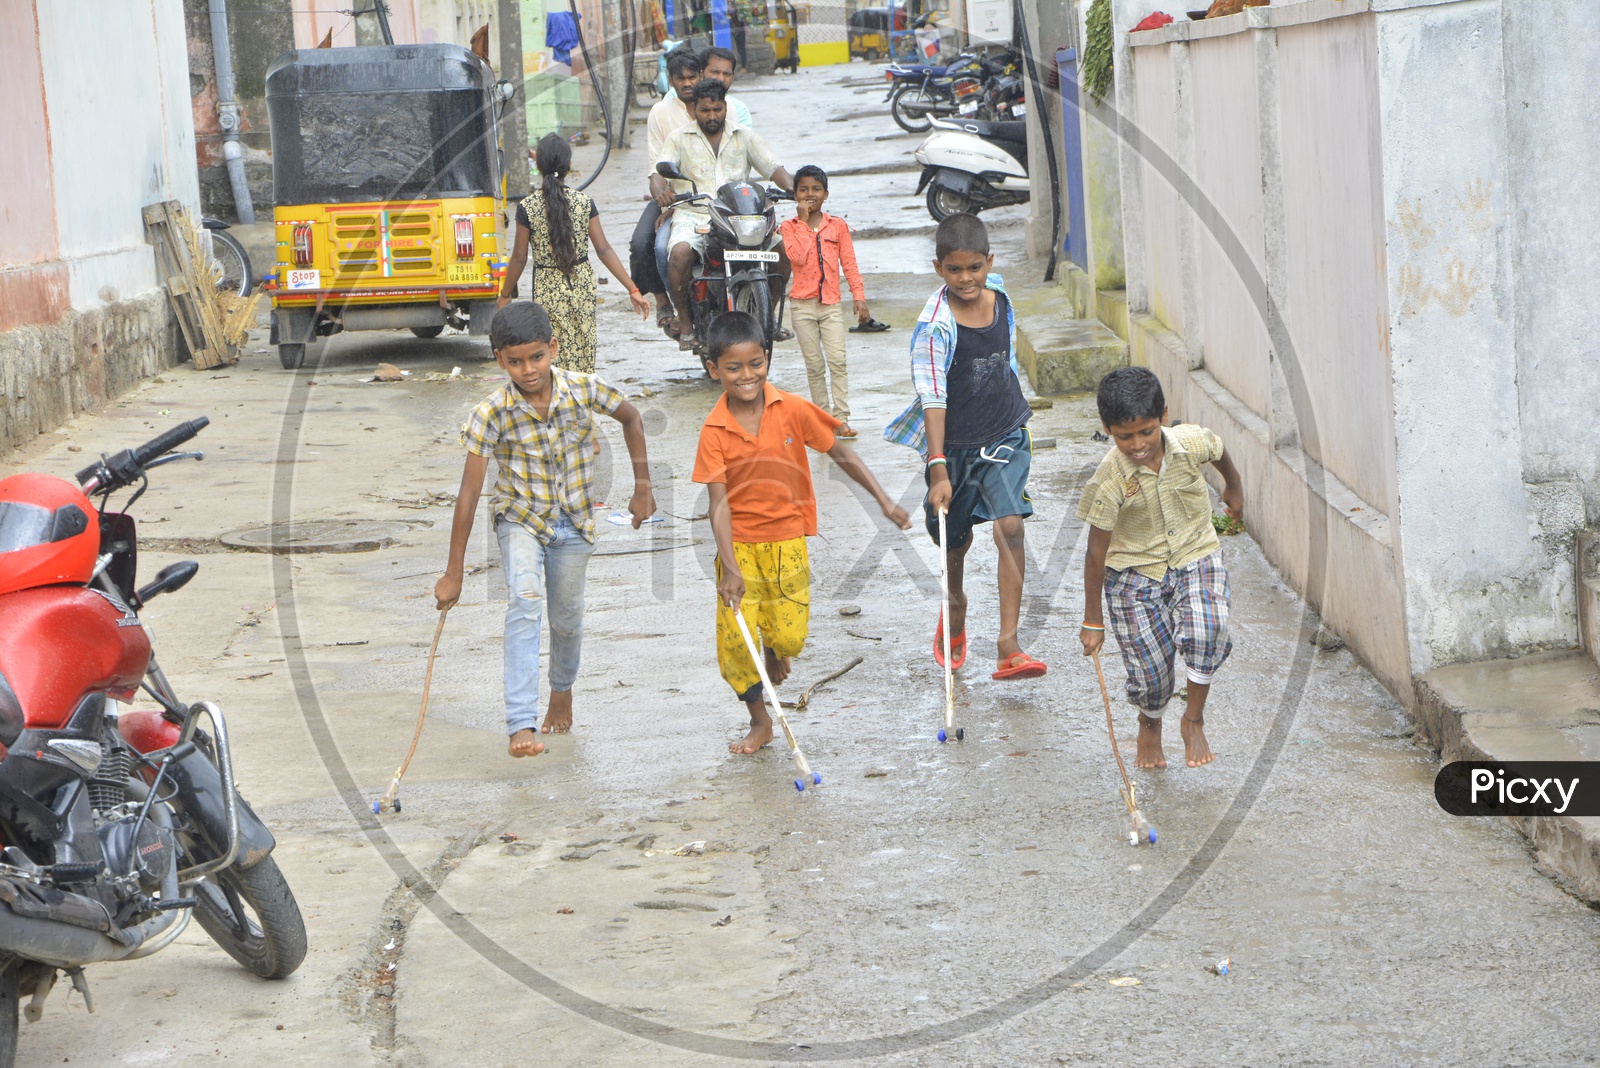 Indian Children Playing With Rolling Wheels Made Of Bottle Cap and Wooden Sticks on Streets